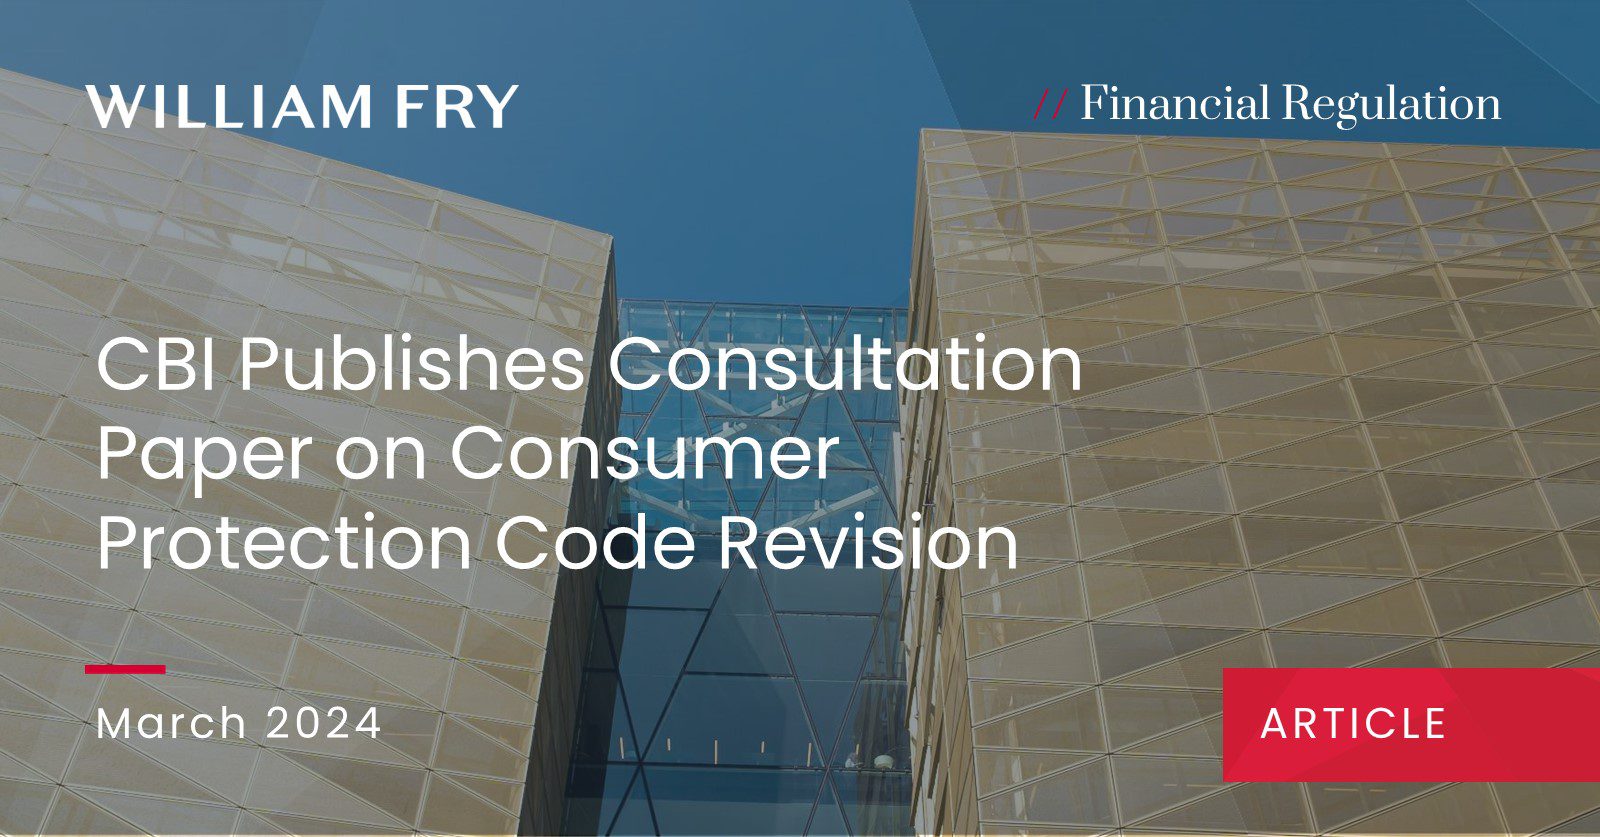 CBI Publishes Consultation Paper on Consumer Protection Code Revision